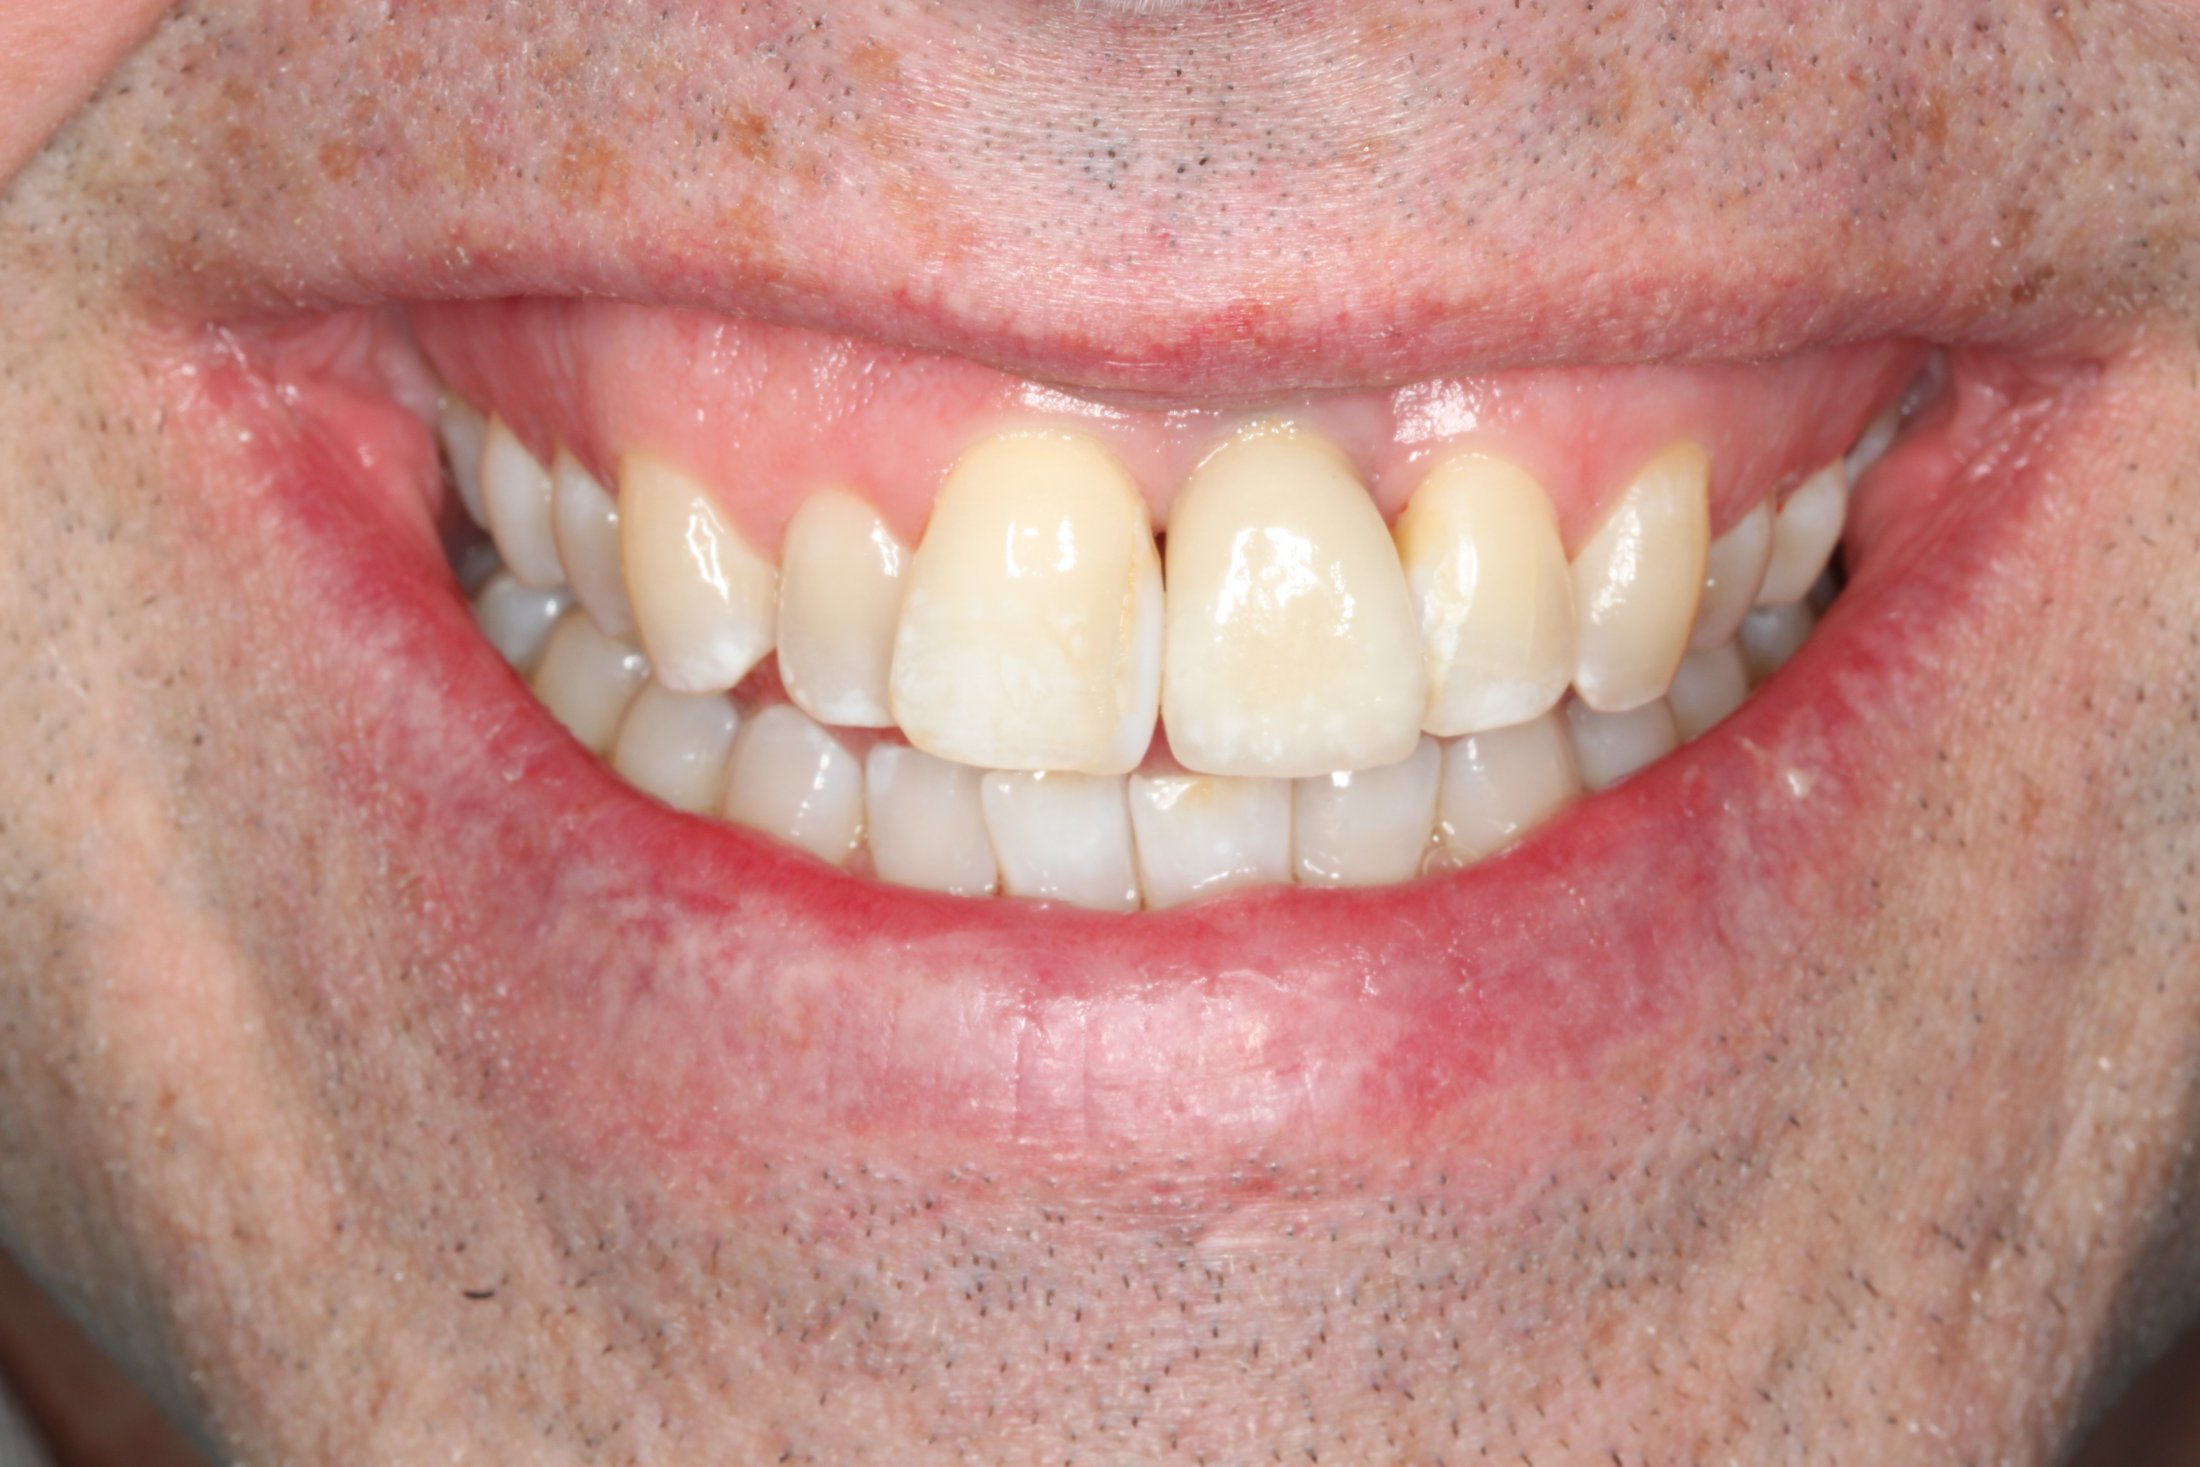 A brand new even smile after replacement of front tooth with implant supported ceramic crowns